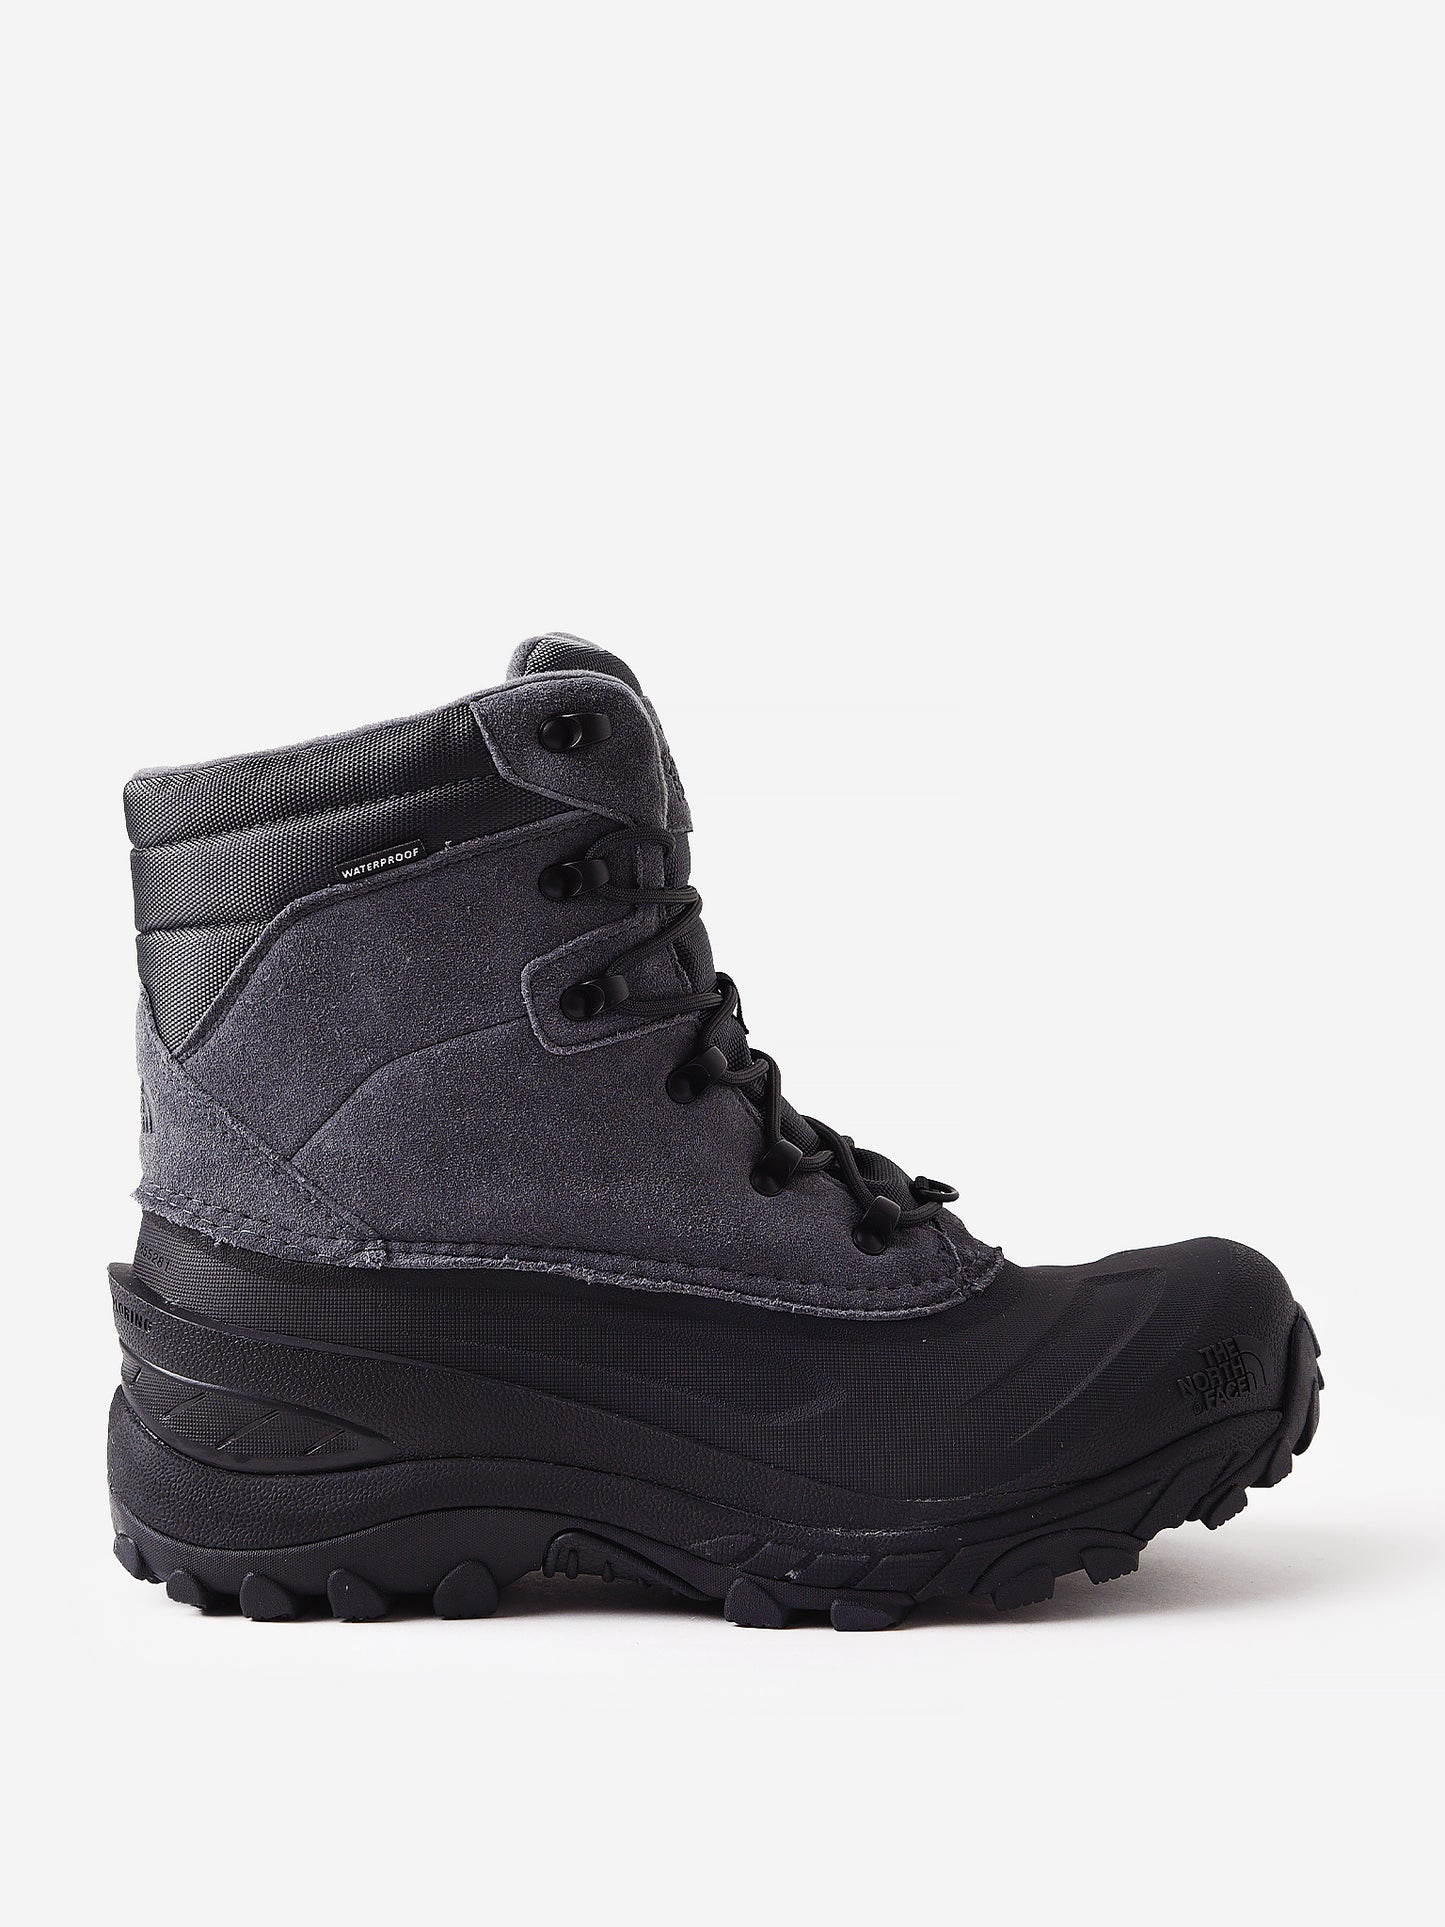 The North Face Men’s Chilkat IV